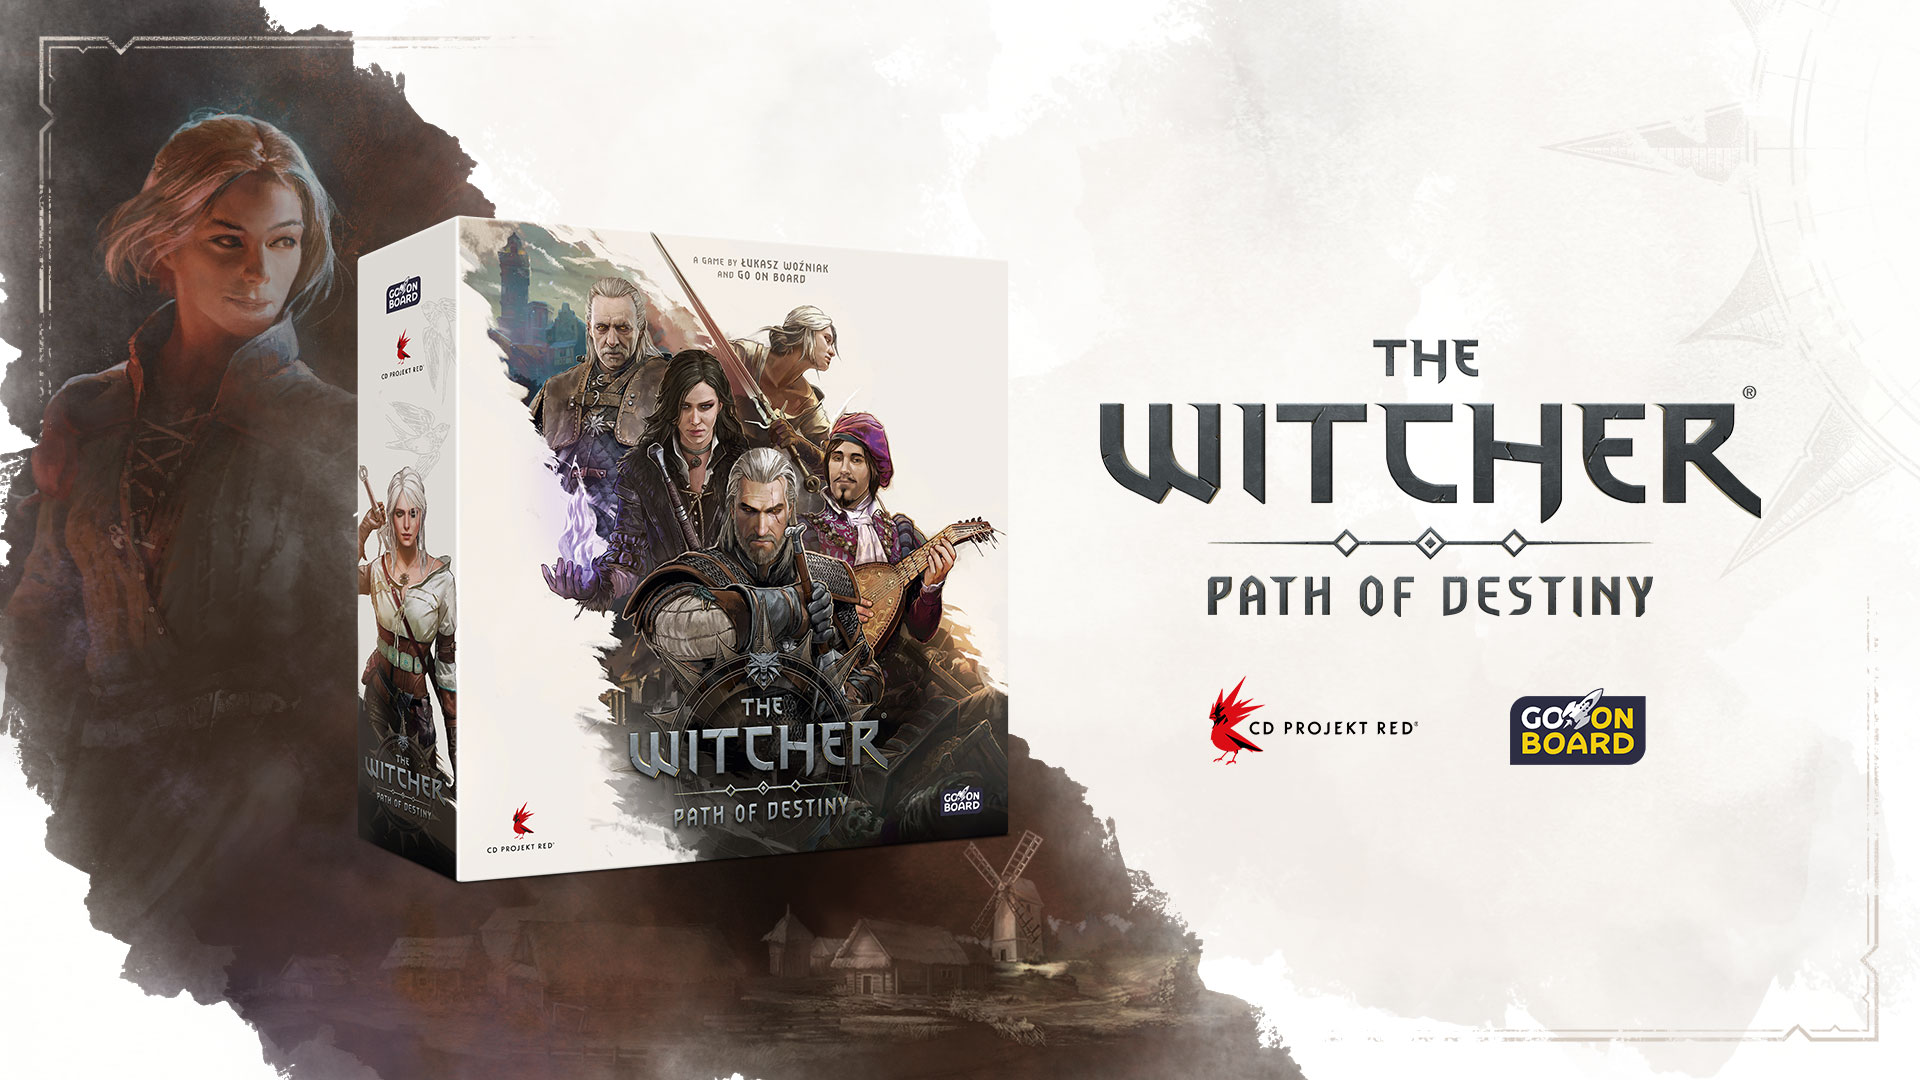 The Witcher: Path of Destiny The Witcher Path of Destiny 